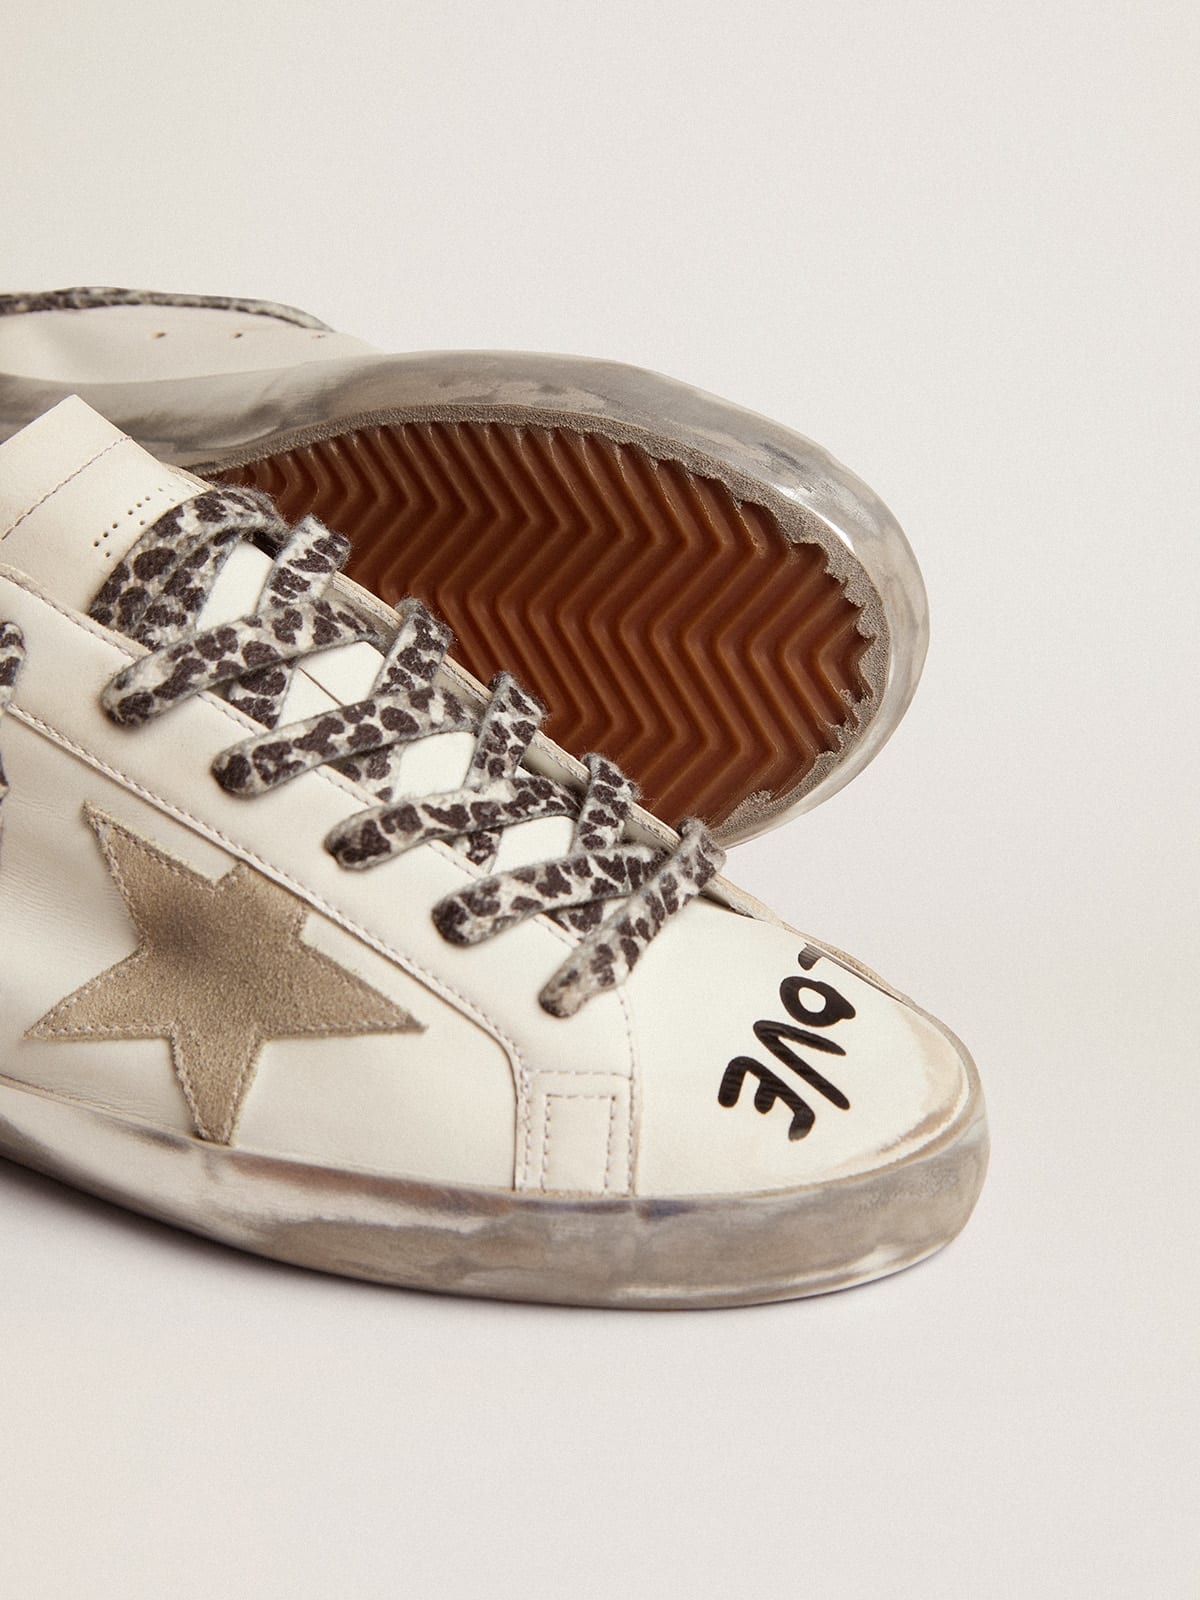 Super-Star sneakers in white leather with ice-gray suede star and contrasting black lettering - 4